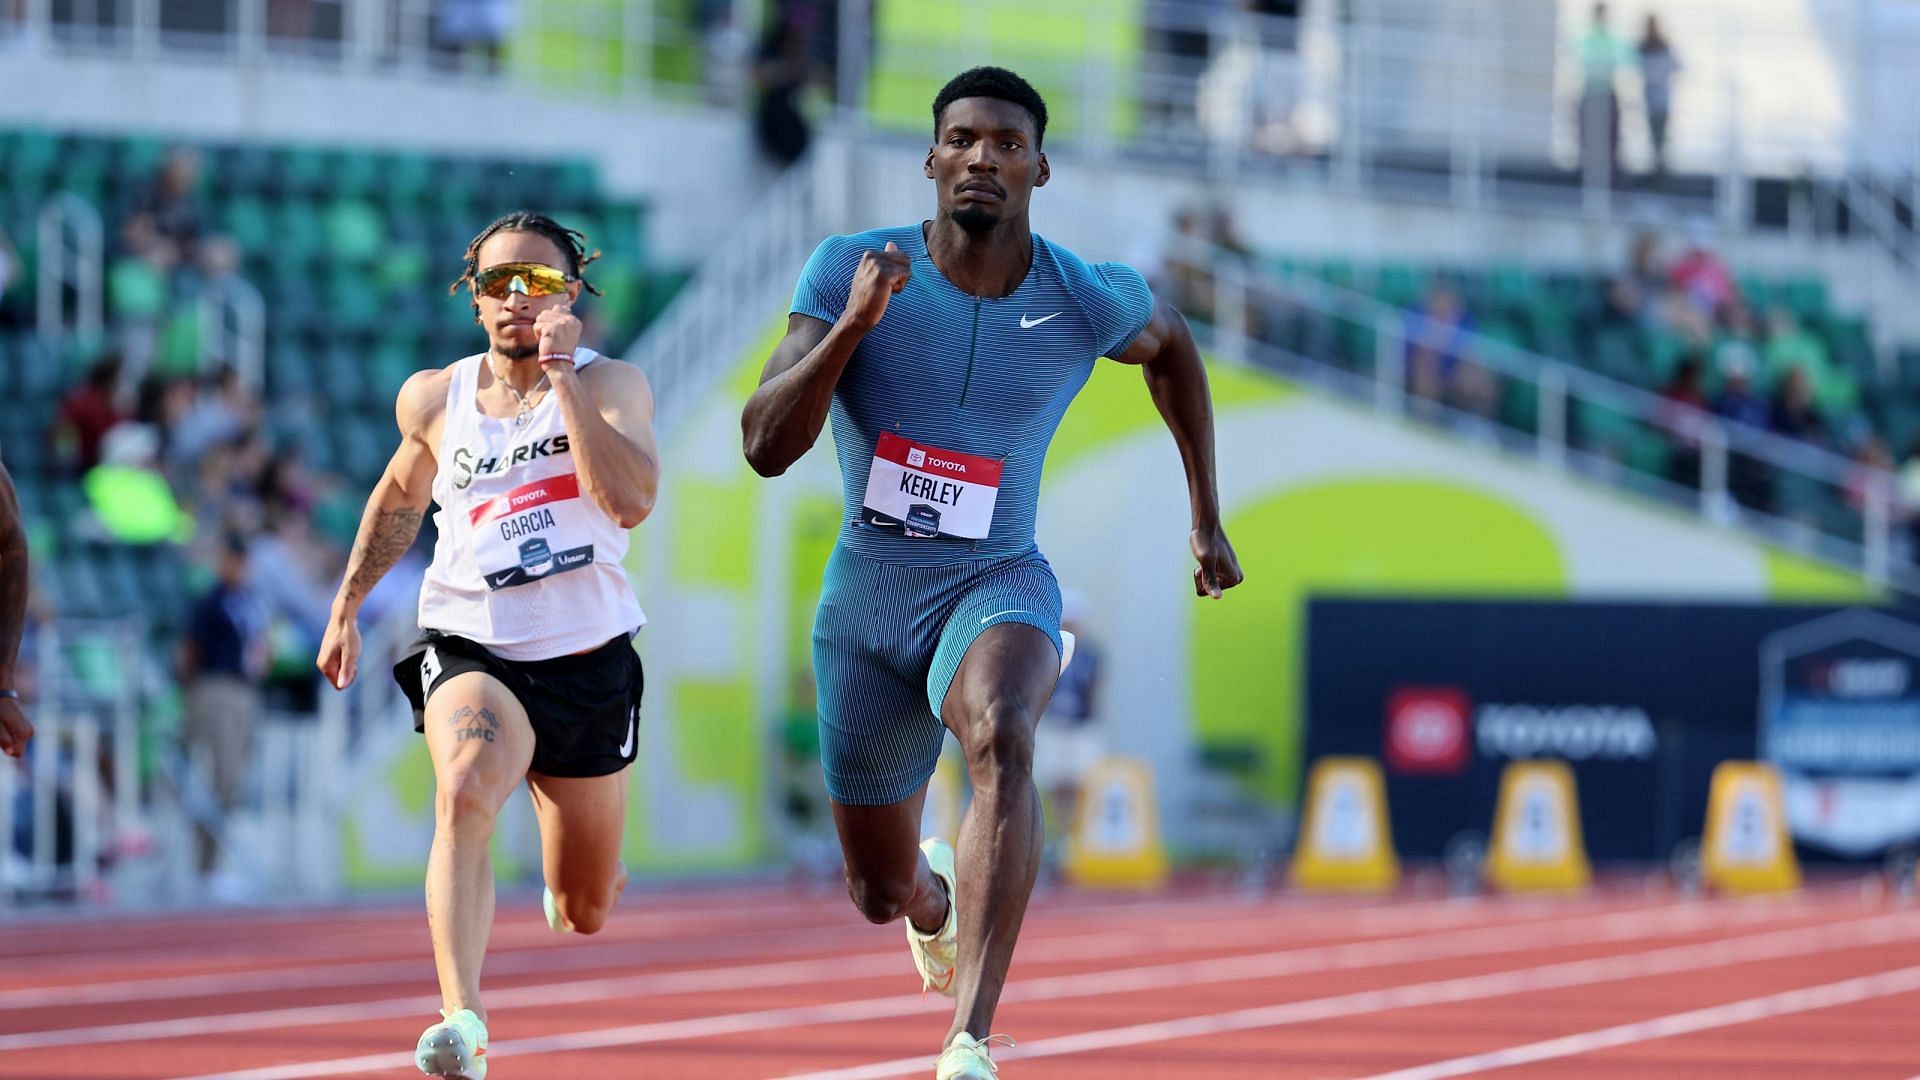 The American sprinter won the USA Track and Field Outdoor Championships 2022 (Image via Getty Images)